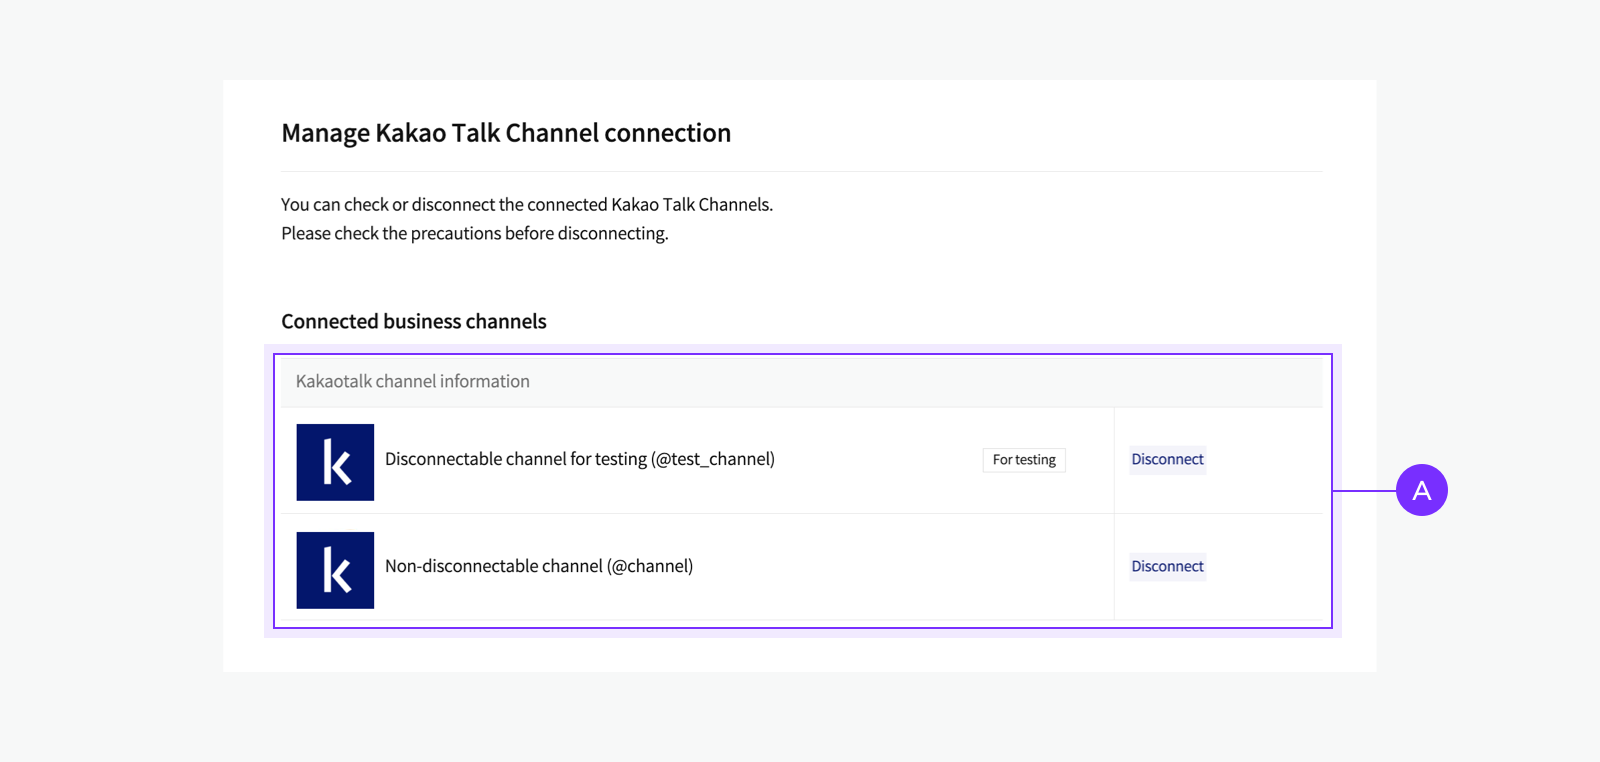 Manage Kakao Talk Channel connection screen